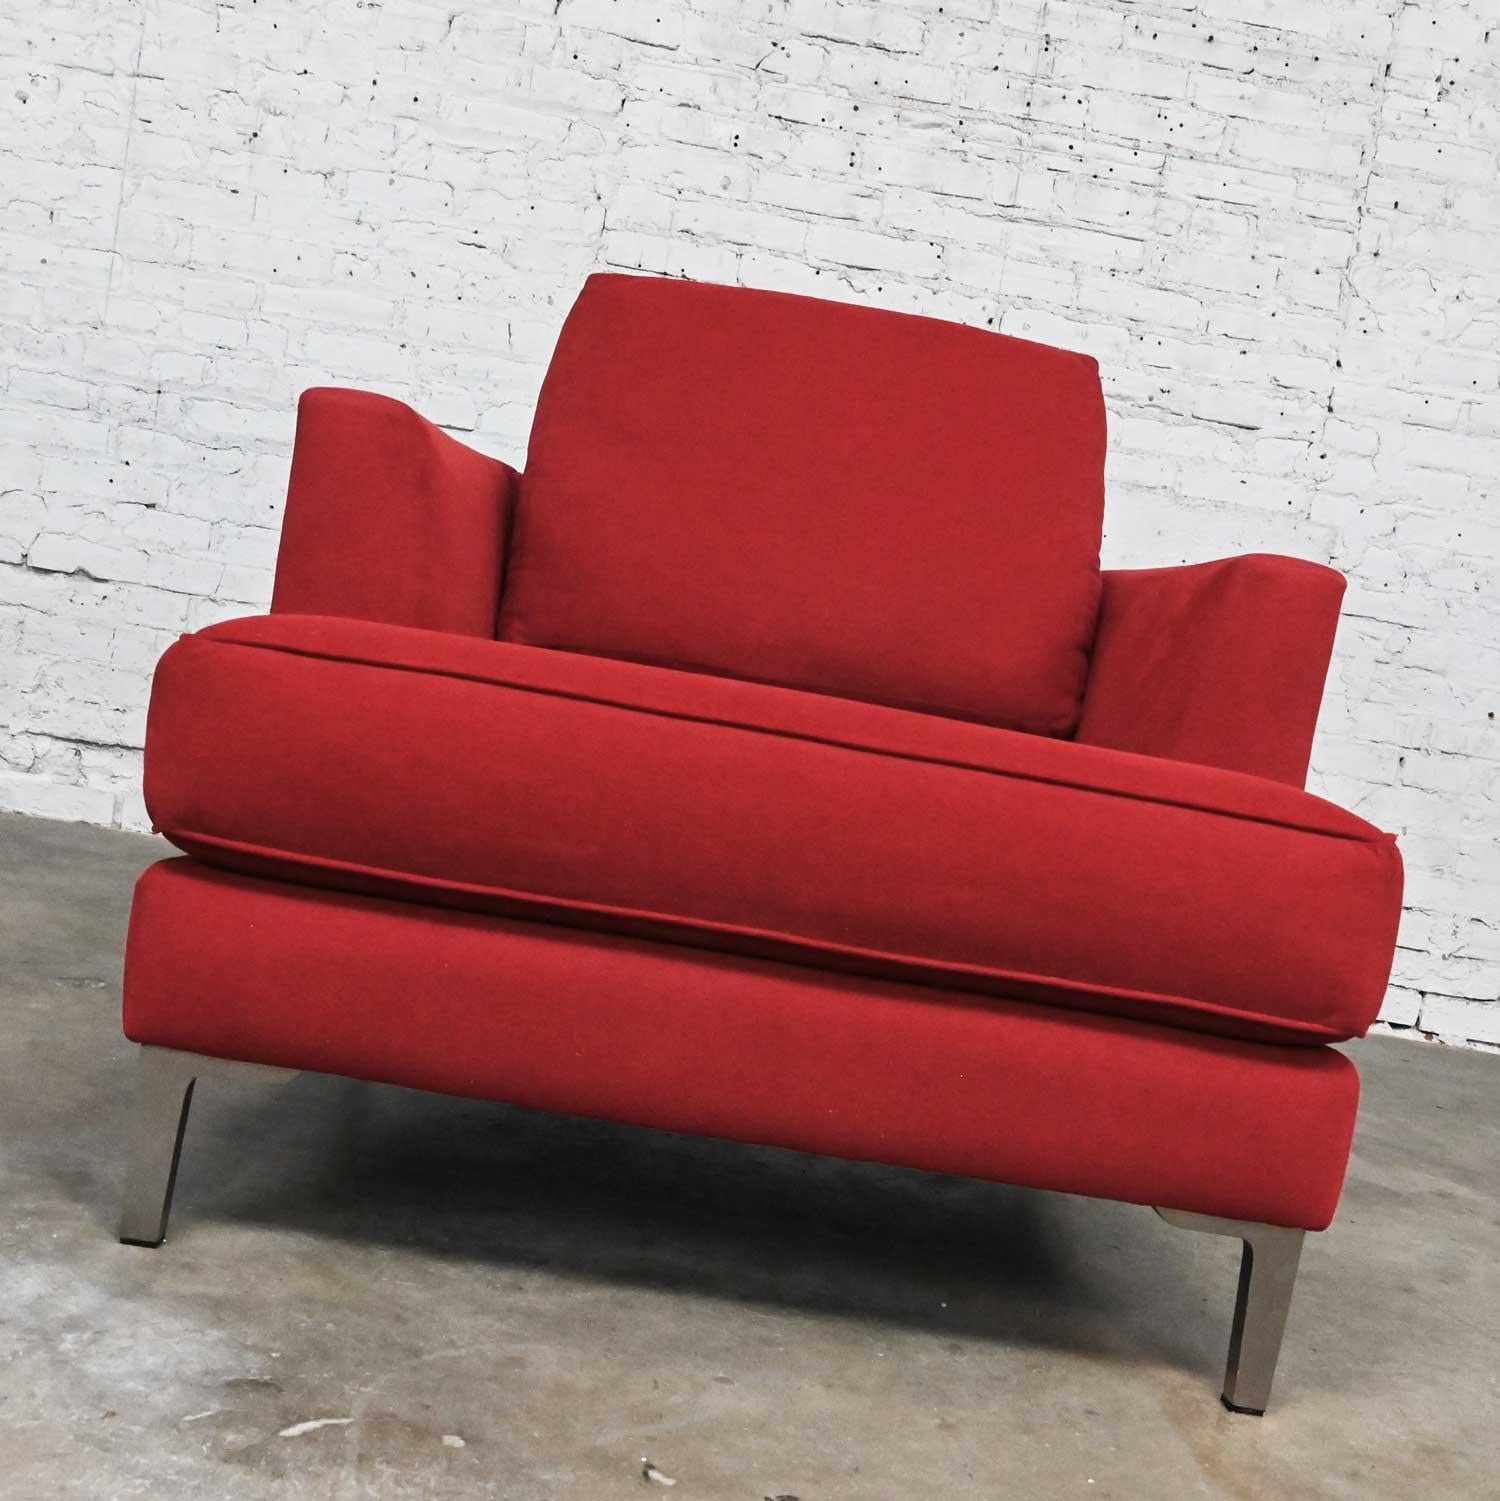 Modern Carter Club Chair Attr Zen Collection Bright Red with Polished Steel Legs 2